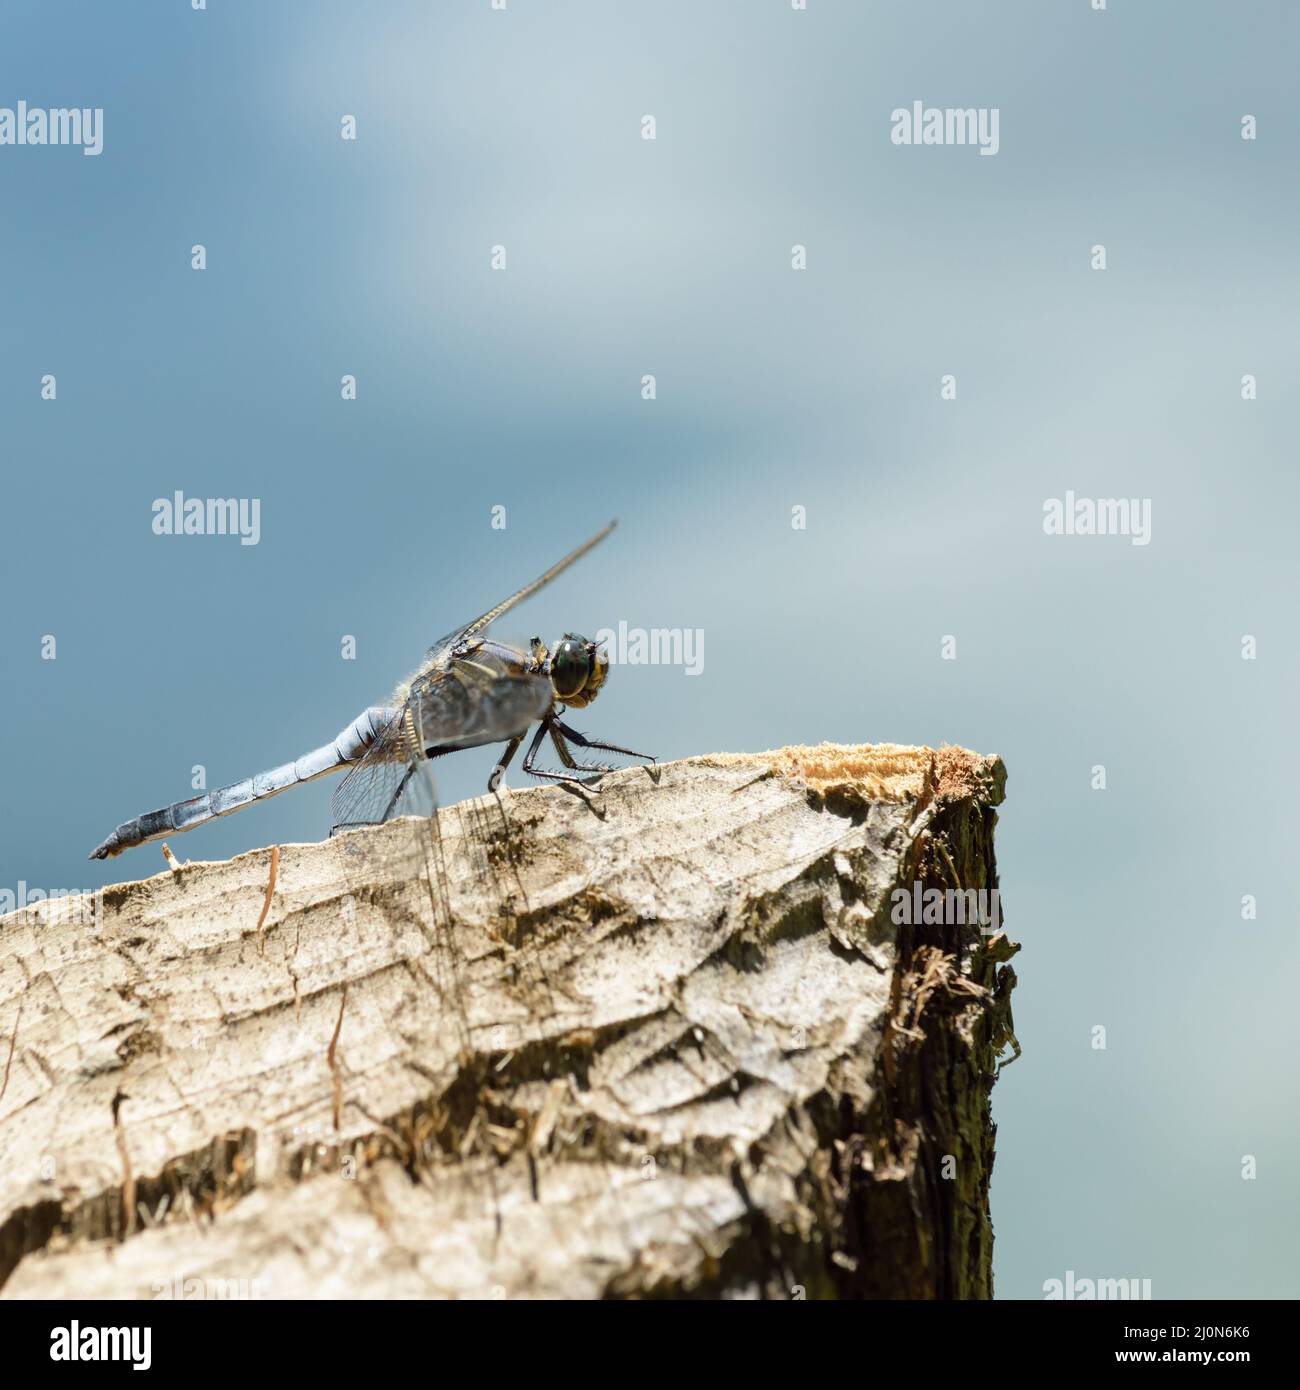 Blue dragonfly (Libellula incesta ) on branch with thorns with soft background with negative space Stock Photo